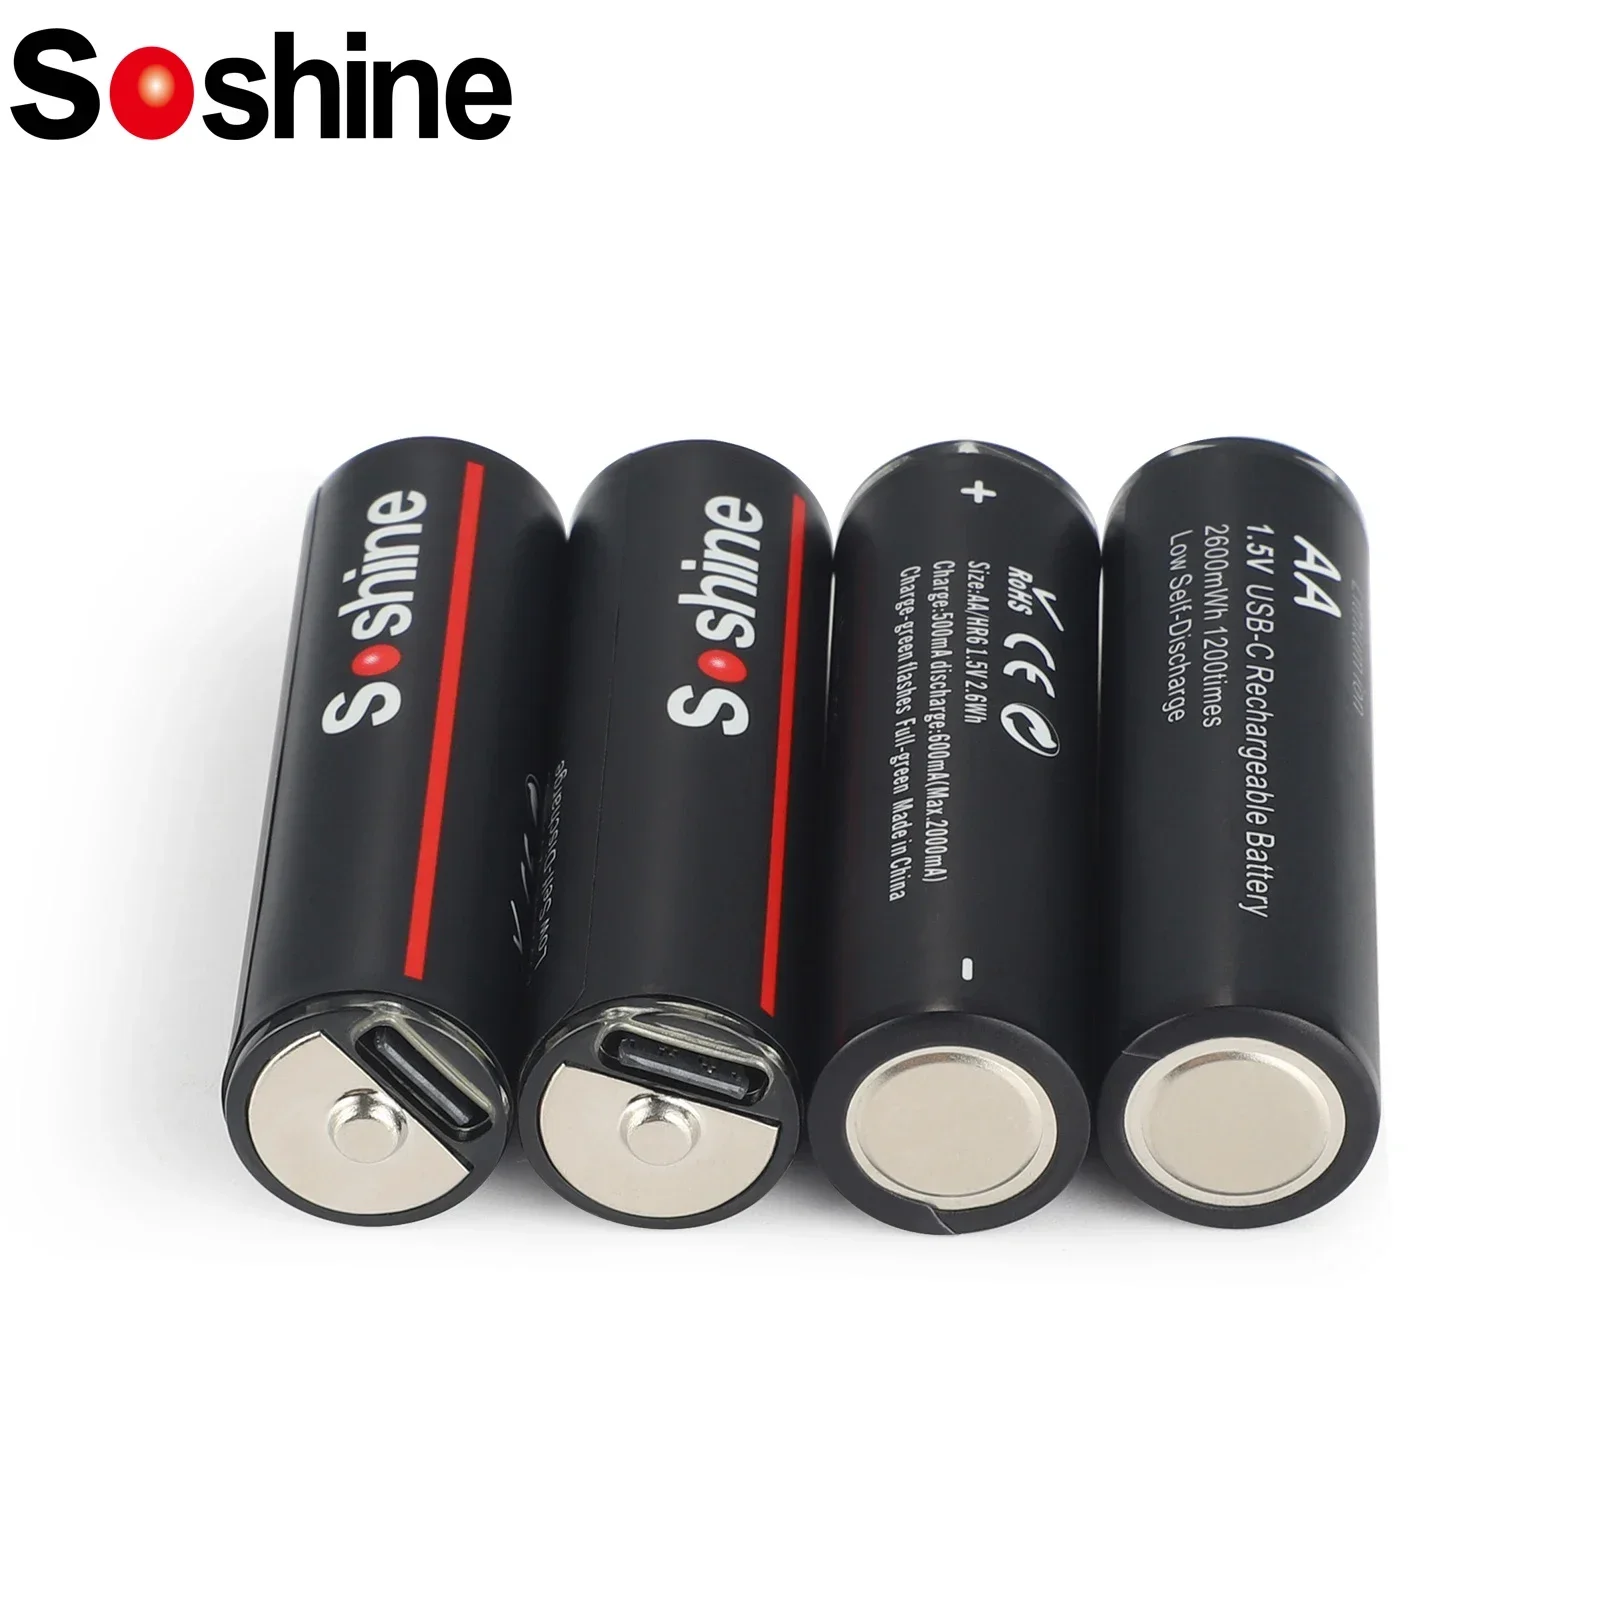 

Soshine 4/8/12PC AA 2600mWh Lithium Battery USB 1.5V 2A Li-Ion Rechargeable Battery for Massager Smoke Detector Metal Intercom